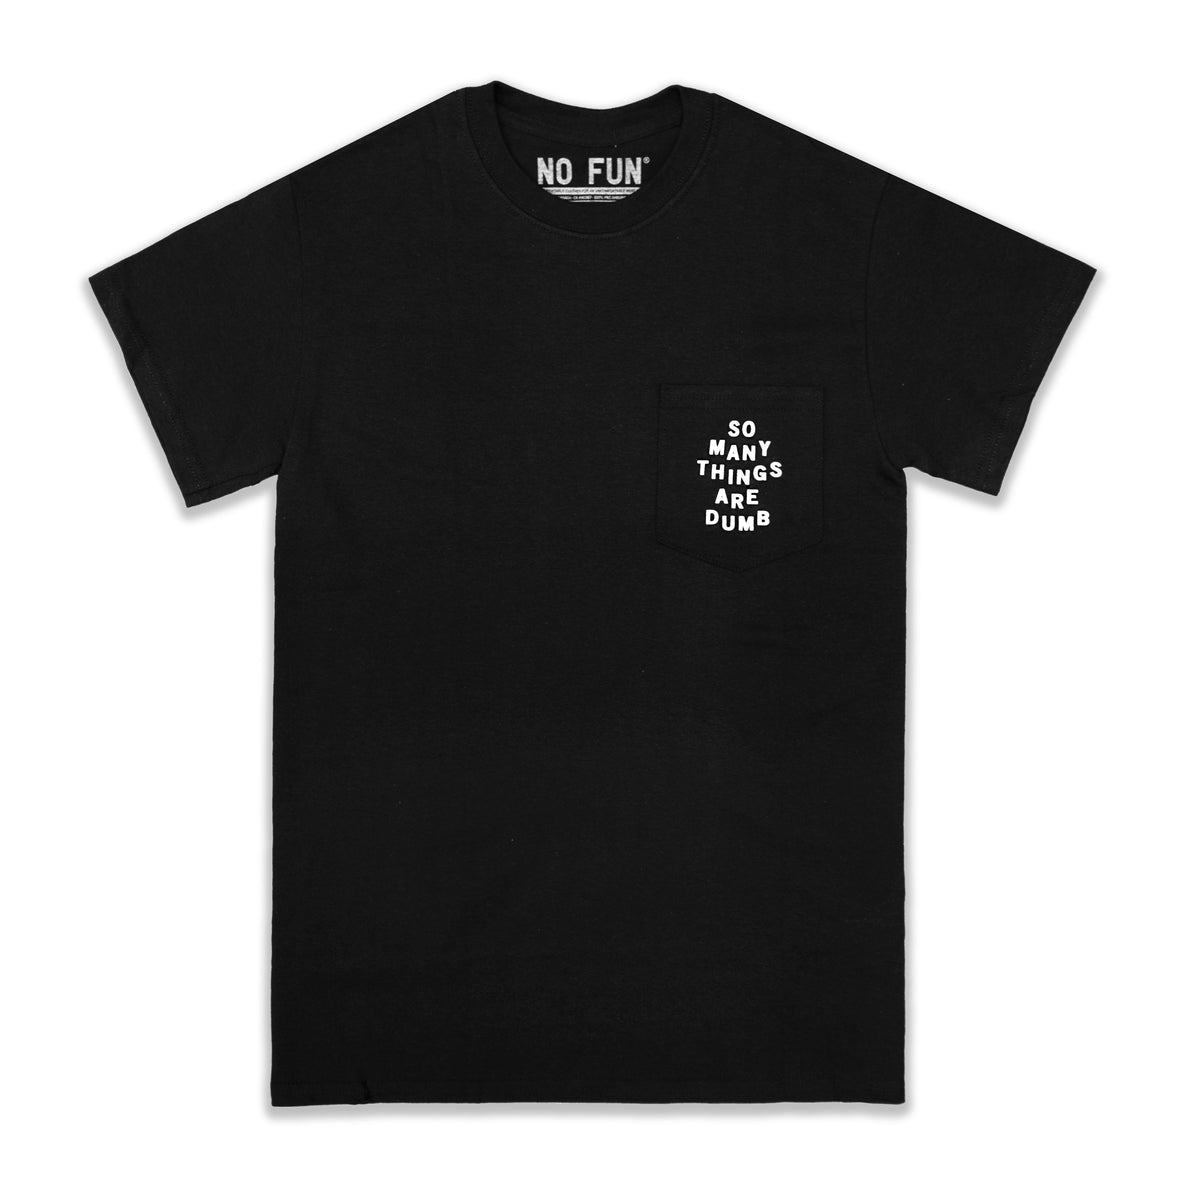 The original "So many Things Are Dumb" Pocket T by No Fun®.  T-shirt is black with front pocket.  The text "So Many Thing Are Dumb" is printed in white, on the front pocket.